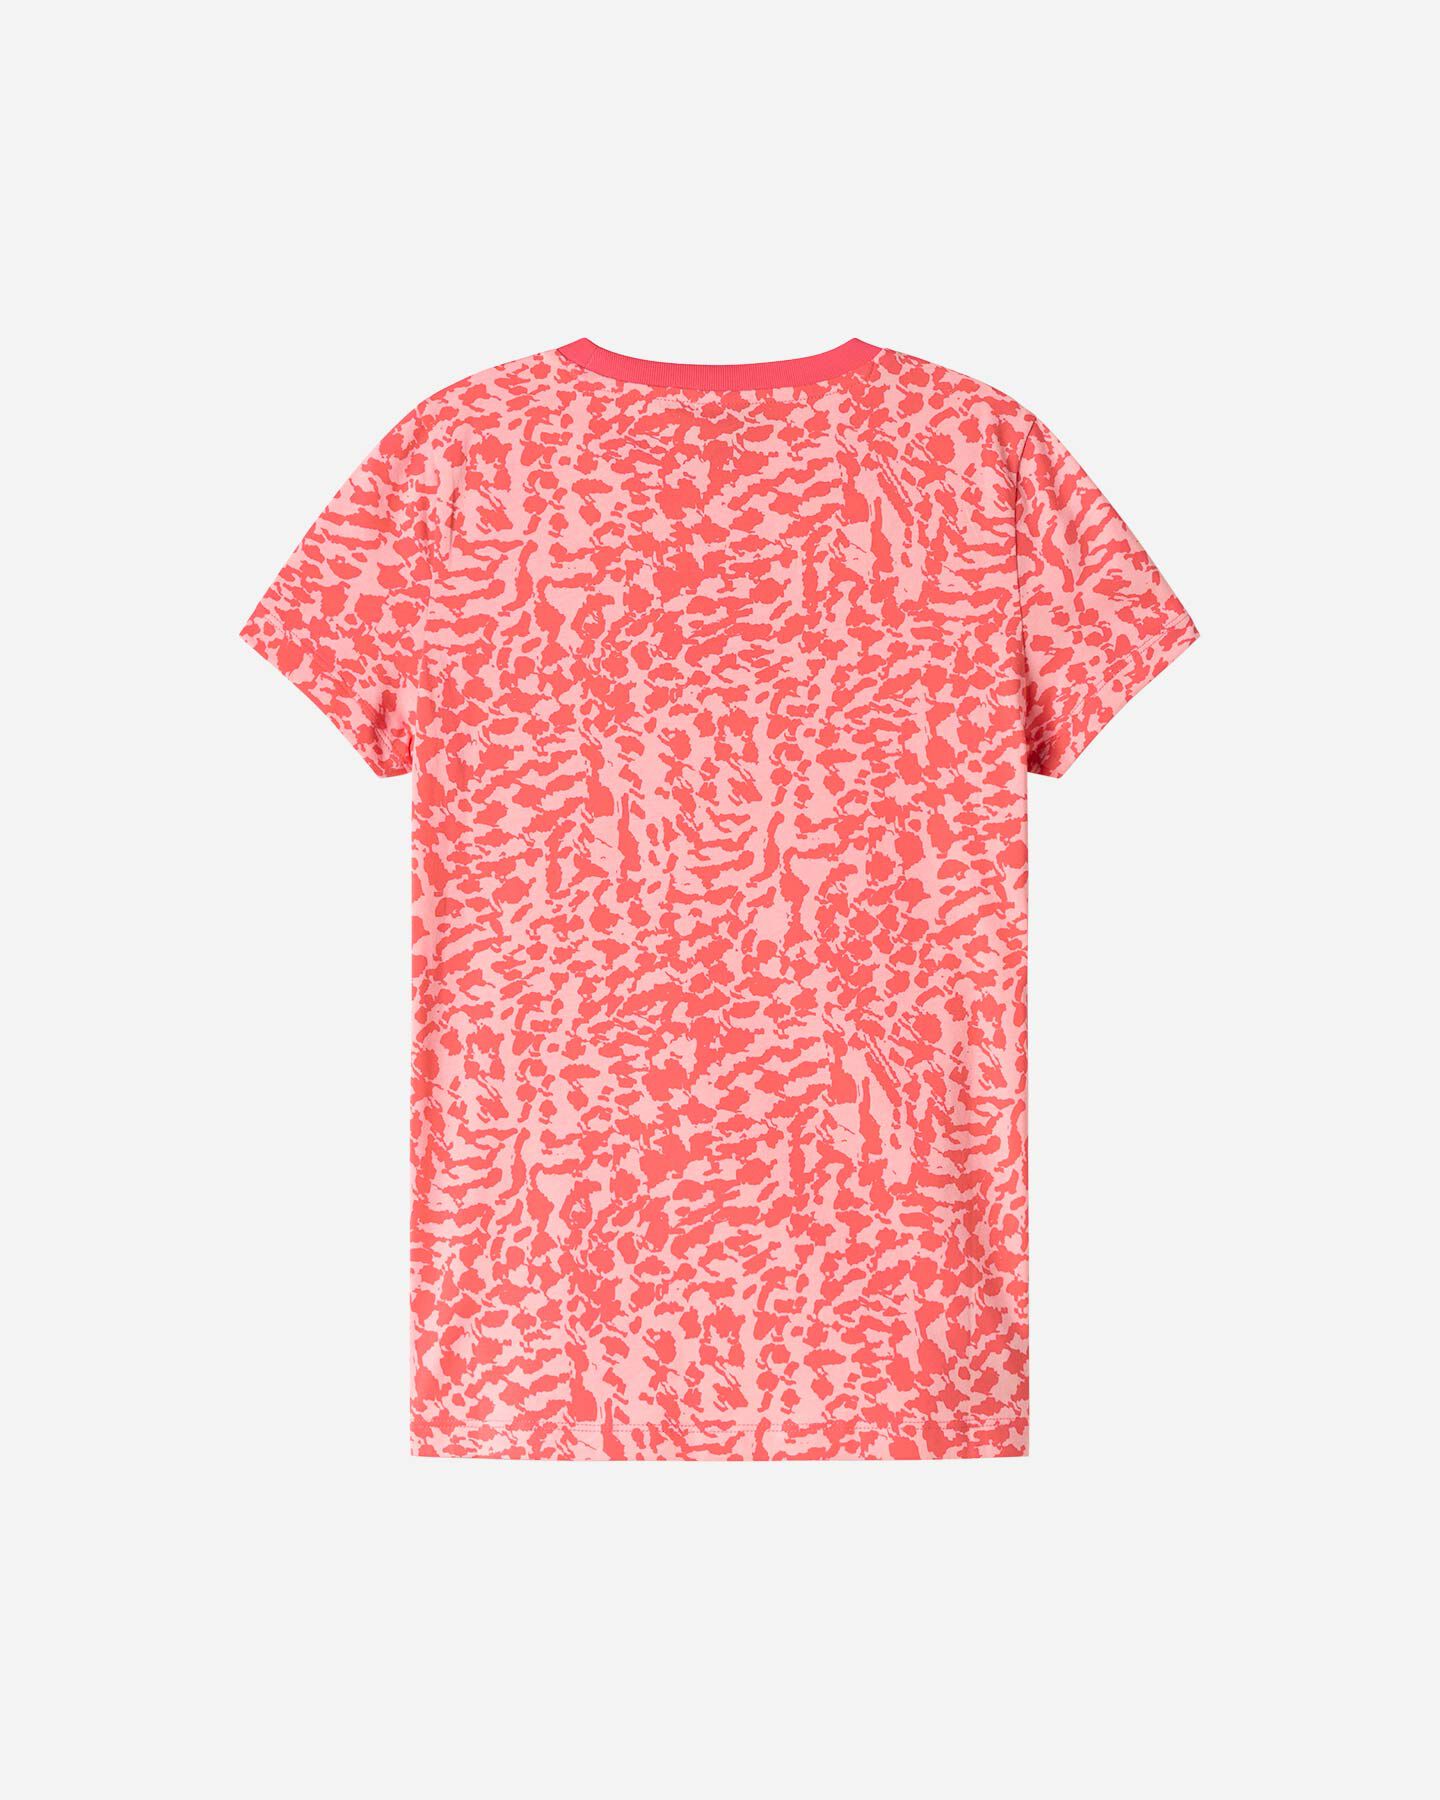  T-Shirt PUMA GIRL ALL OVER JR S5606803|63|104 scatto 1